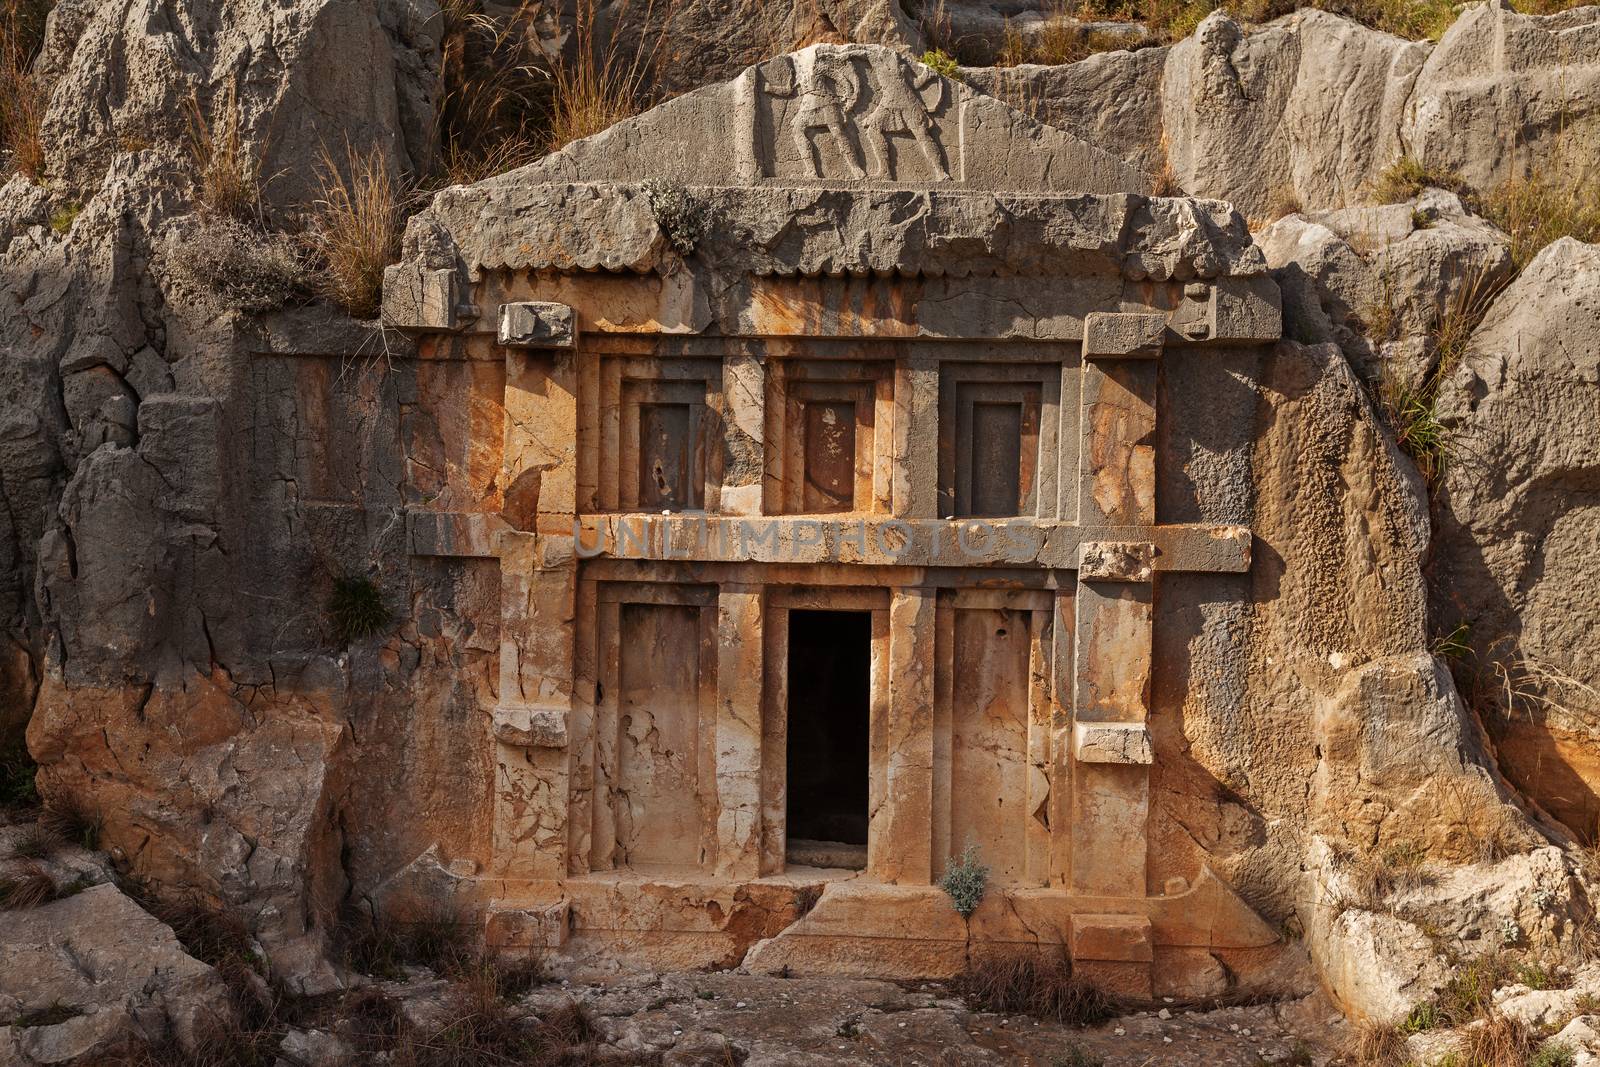 Tomb carved in rocks in ancient lycian necropolis in Mira, Demre, Turkey